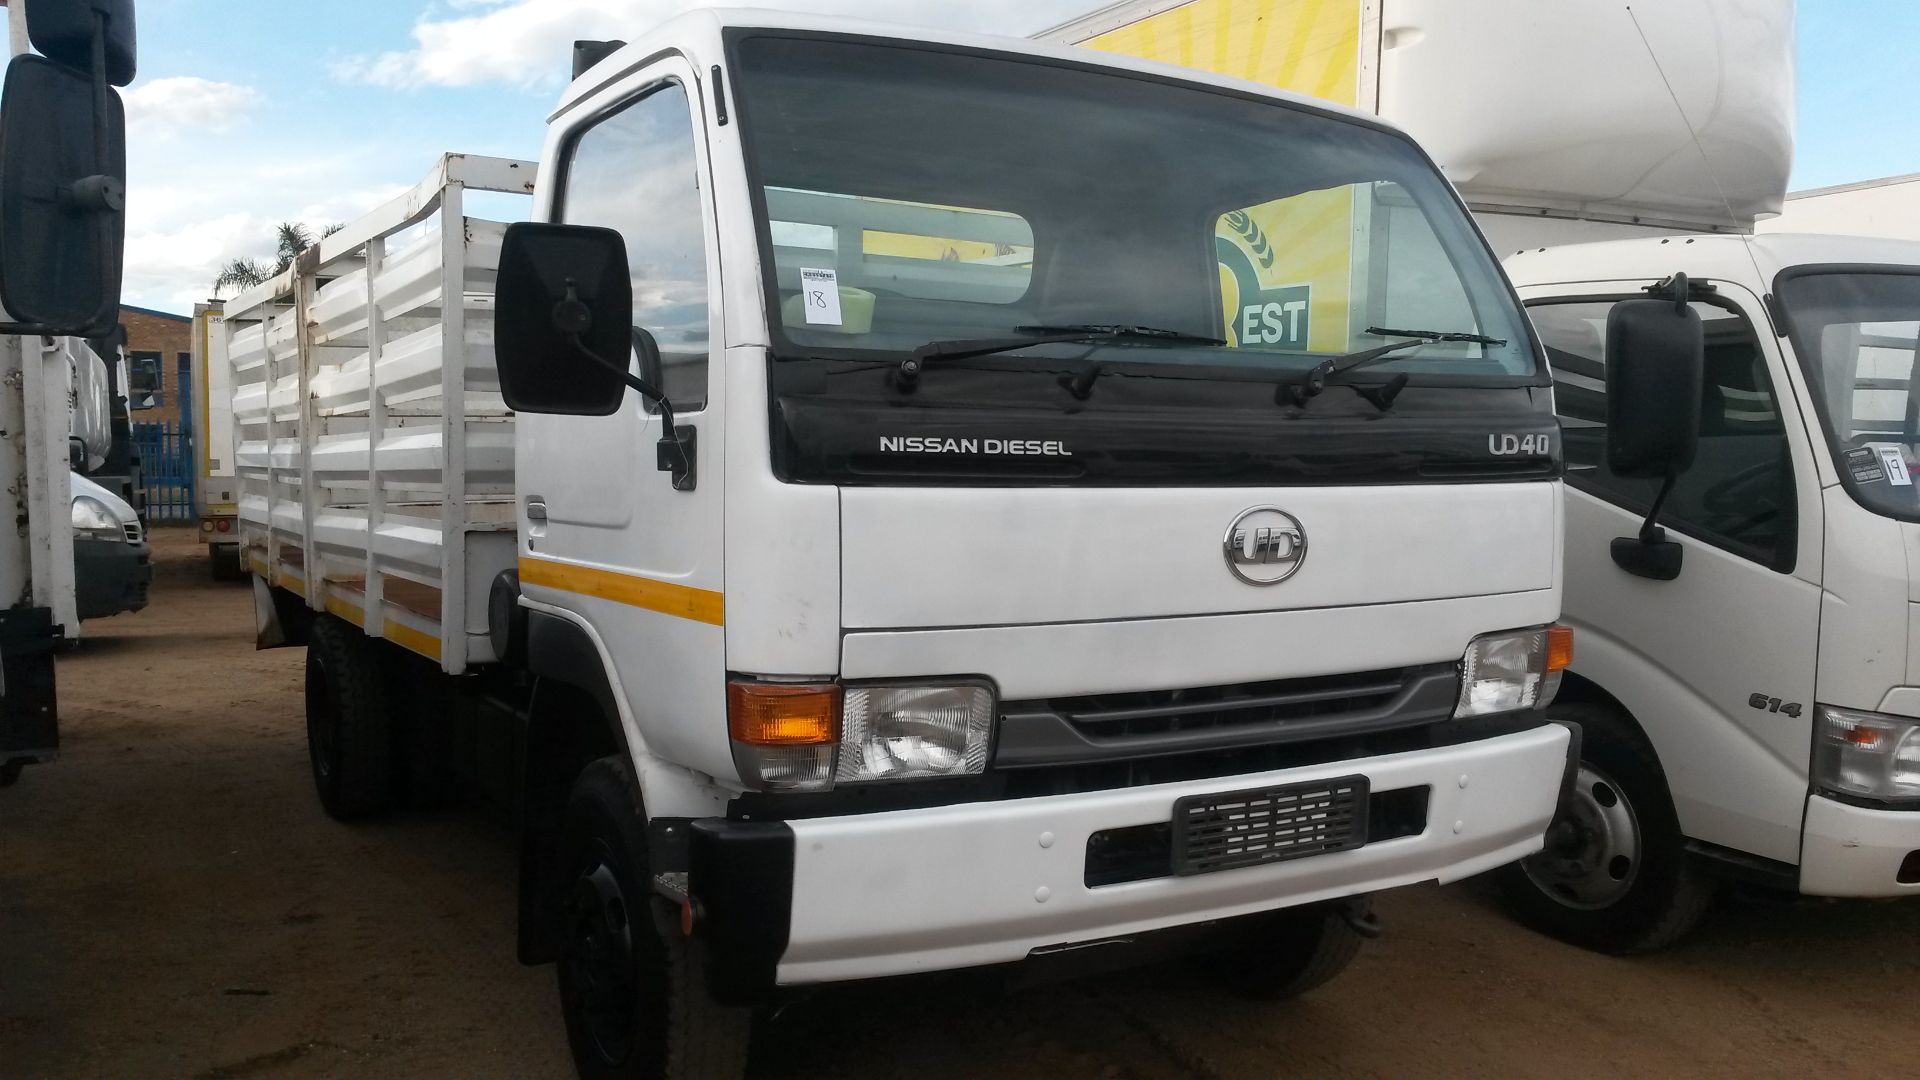 2012 NISSAN UD40 CATTLE BODY - REG NO: HVY904NW